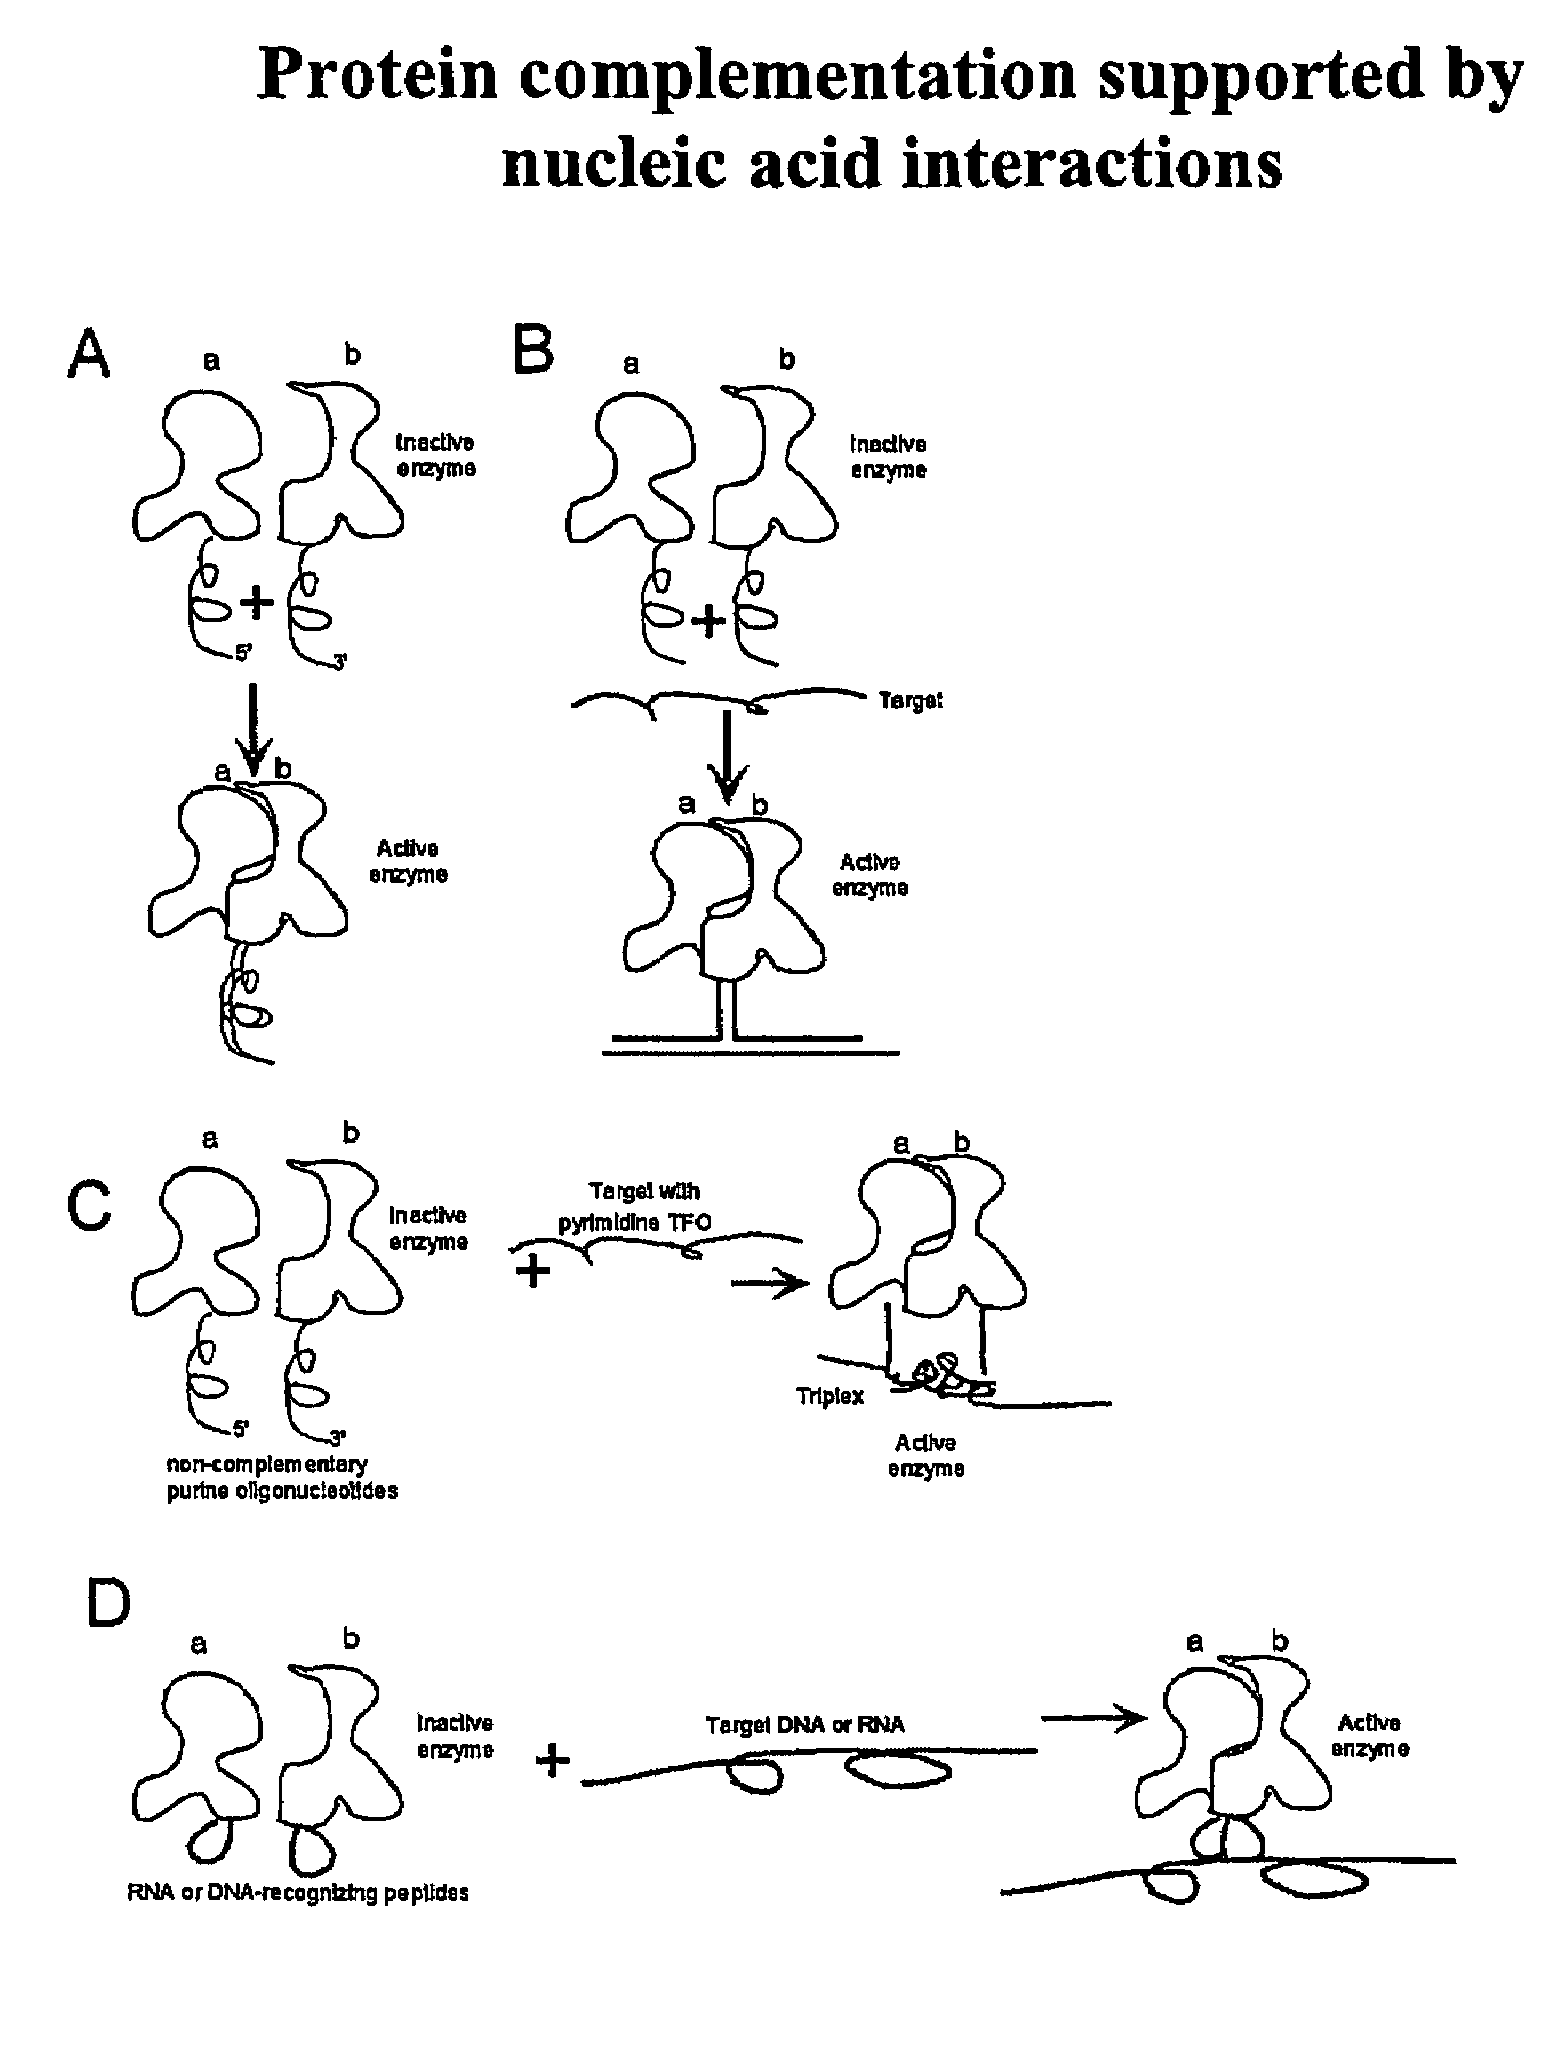 Nucleic acid supported protein complementation